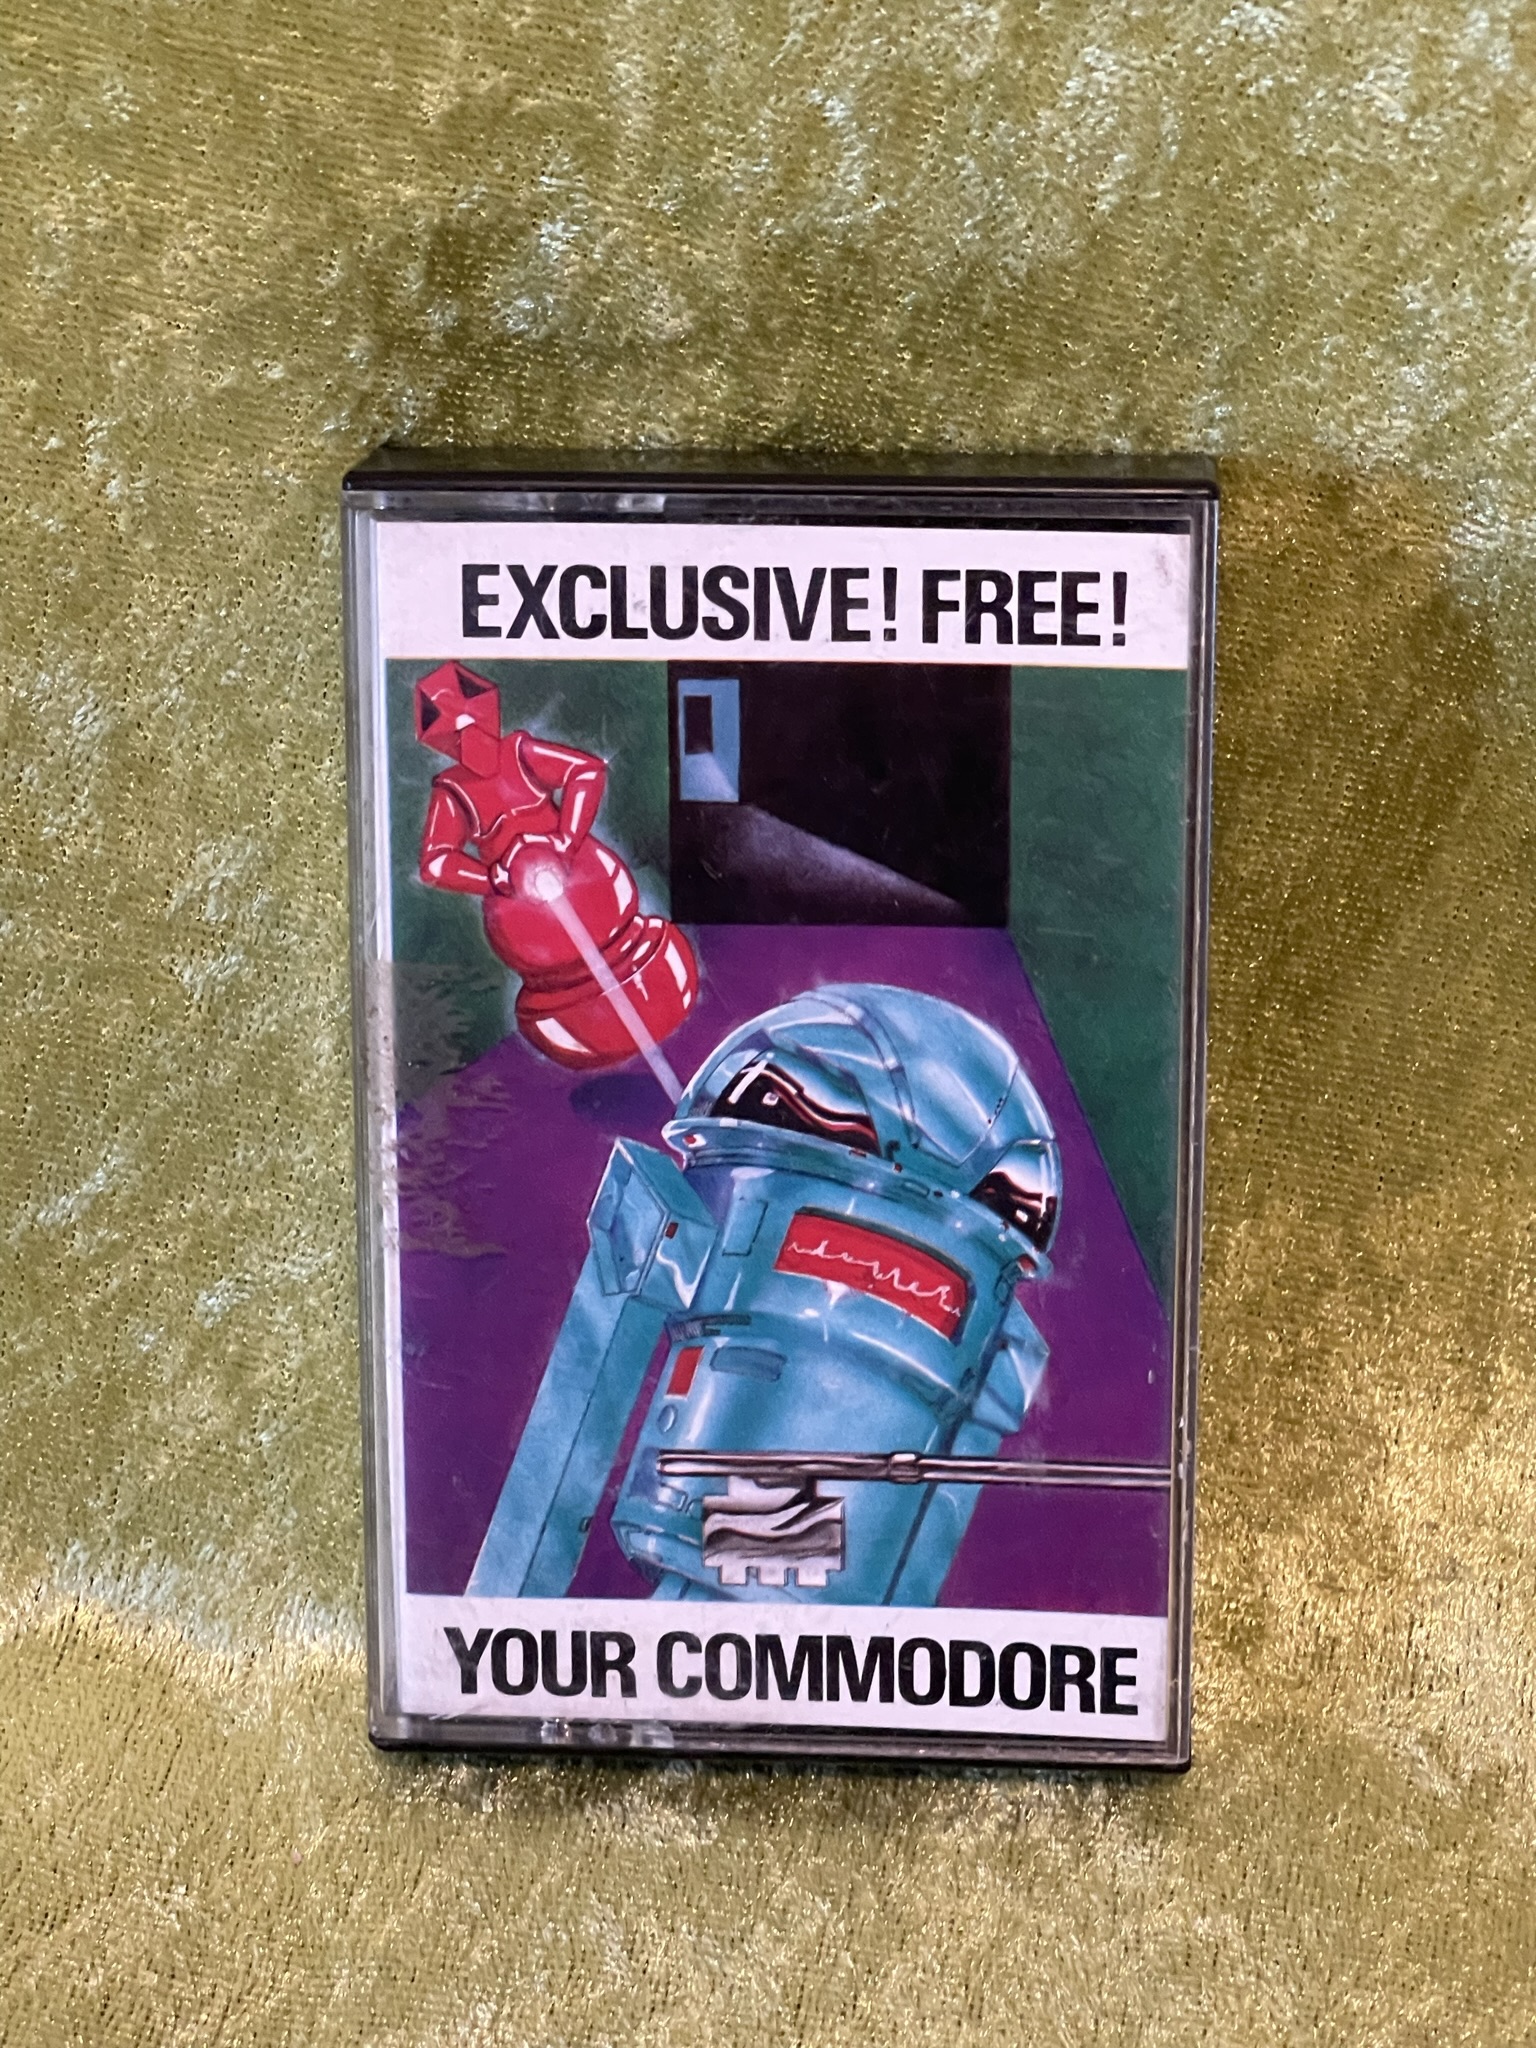 Exclusive! Free!